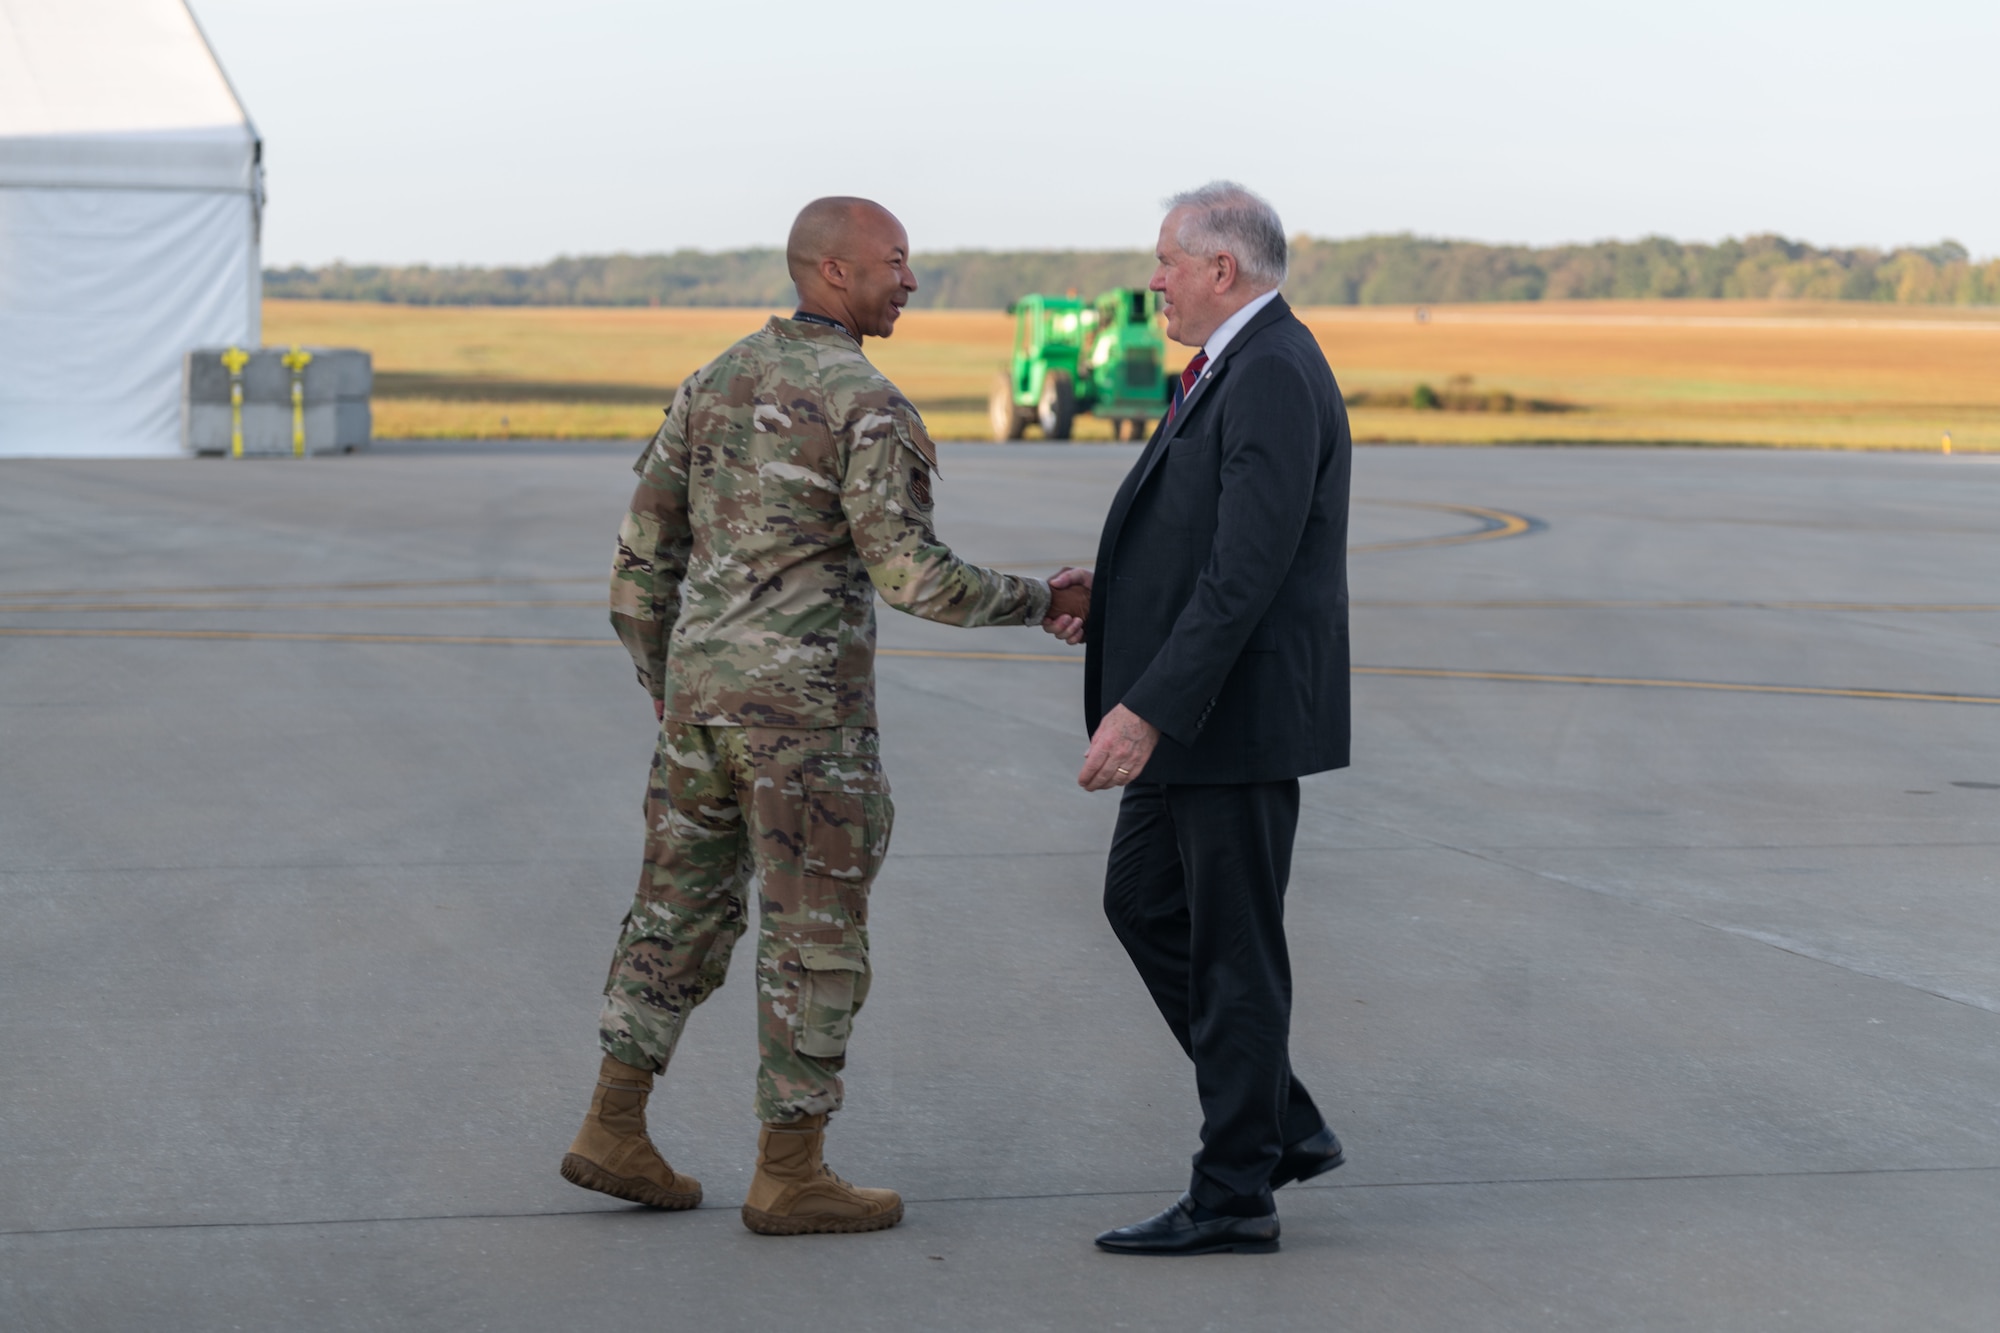 Arnold Engineering Development Complex Commander Col. Randel Gordon, left, greets Secretary of the Air Force Frank Kendall upon his arrival at Arnold Air Force Base, Tenn., Oct. 4, 2023. During his visit to Arnold, headquarters of AEDC, Kendall observed some base operations, toured several facilities and received overviews of current and planned AEDC test capabilities. (U.S. Air Force photo by Keith Thornburgh)